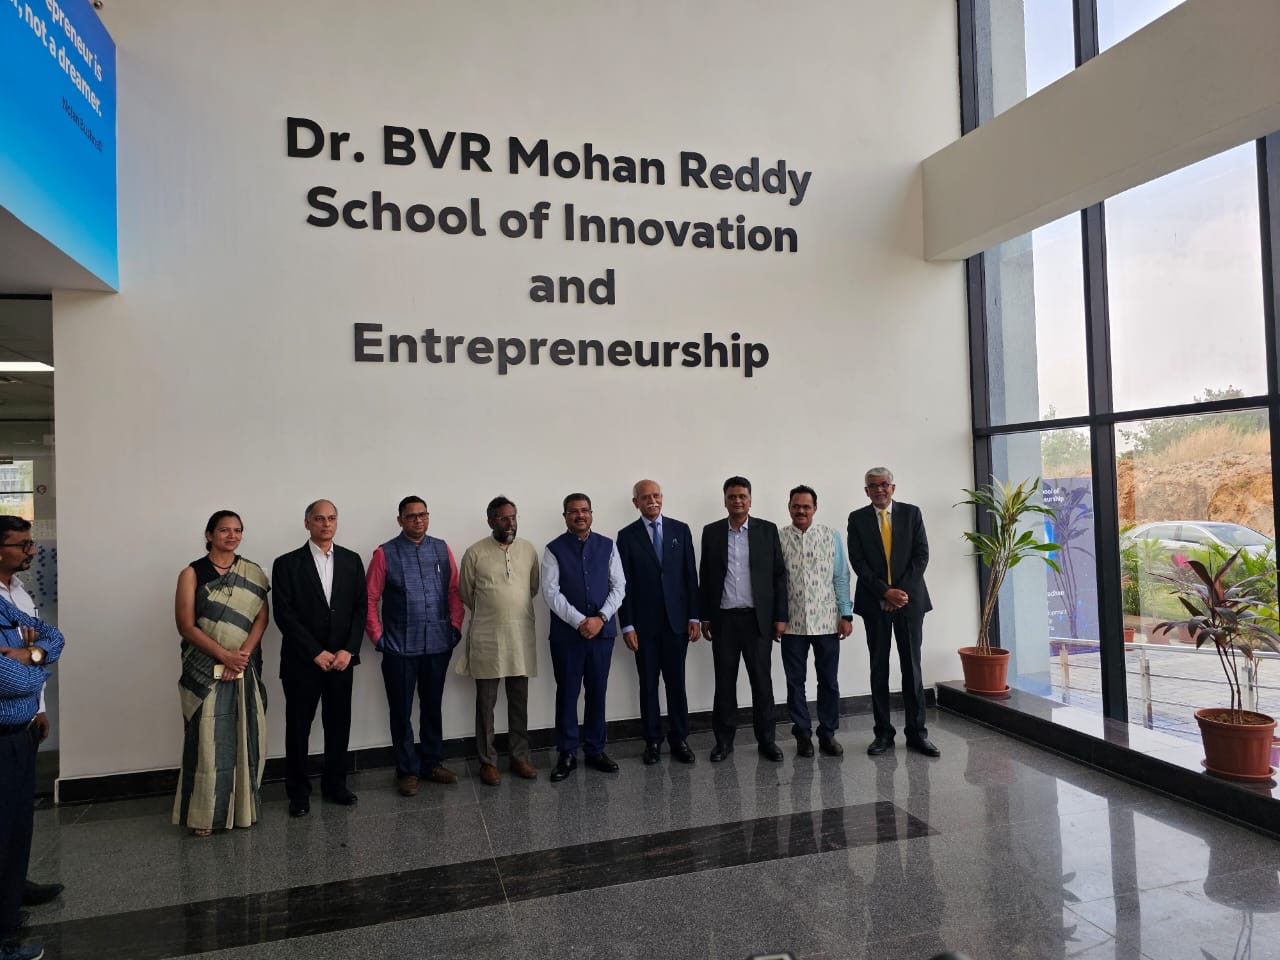 Union Education Minister Dharmendra Pradhan Inaugurates Dr. BVR Mohan Reddy School of Innovation and Entrepreneurship at IIT Hyderabad Campus